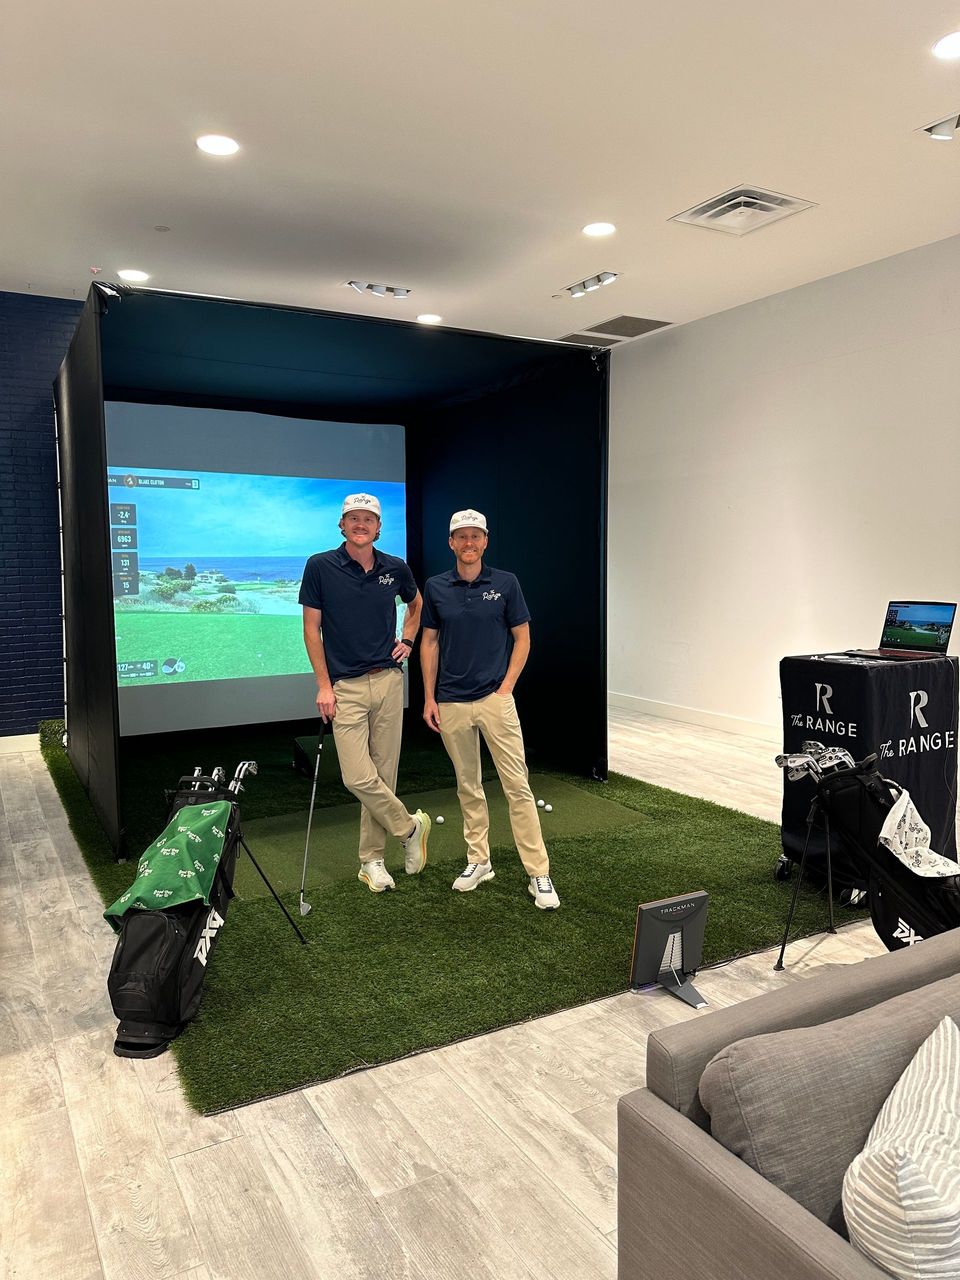 Jake and Blake - Owners of The Range Golf, a Golf simulator Rental in Dallas, TX